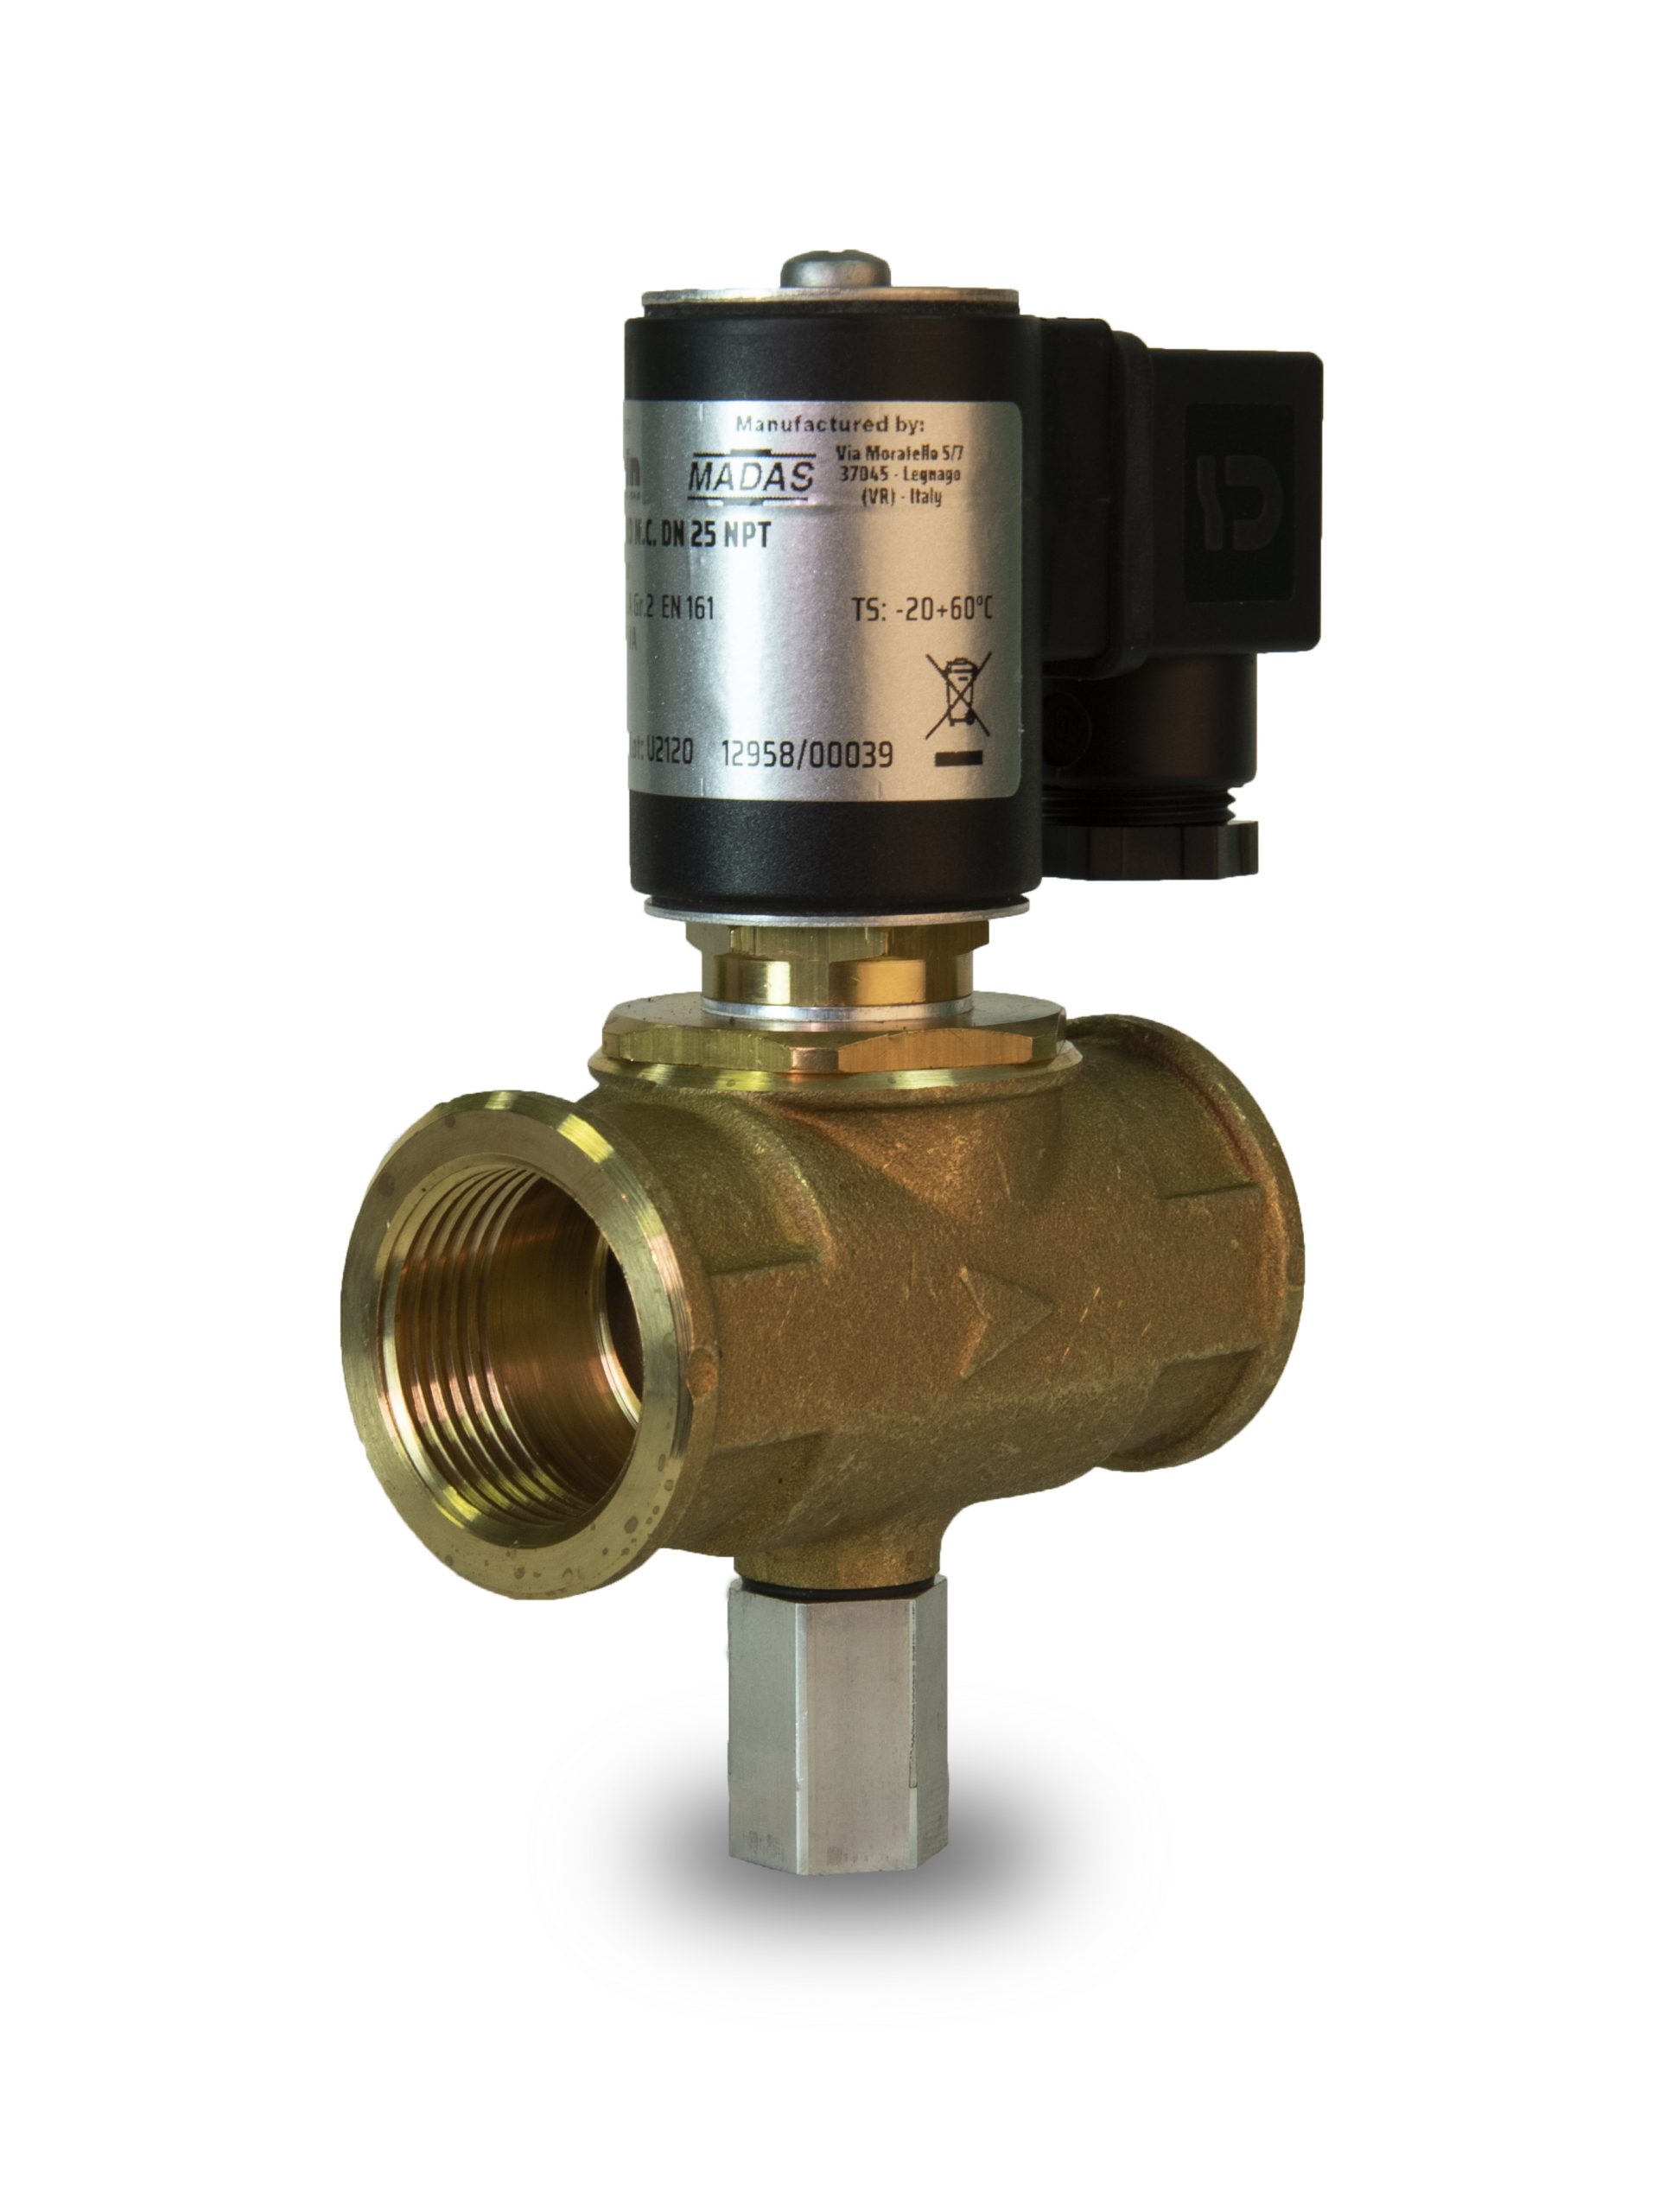 SOLENOID VALVE  1 Inches 24V DC NORMALLY CLOSED  0-6 BAR from Gas Equipment Company Llc Abu Dhabi, UNITED ARAB EMIRATES